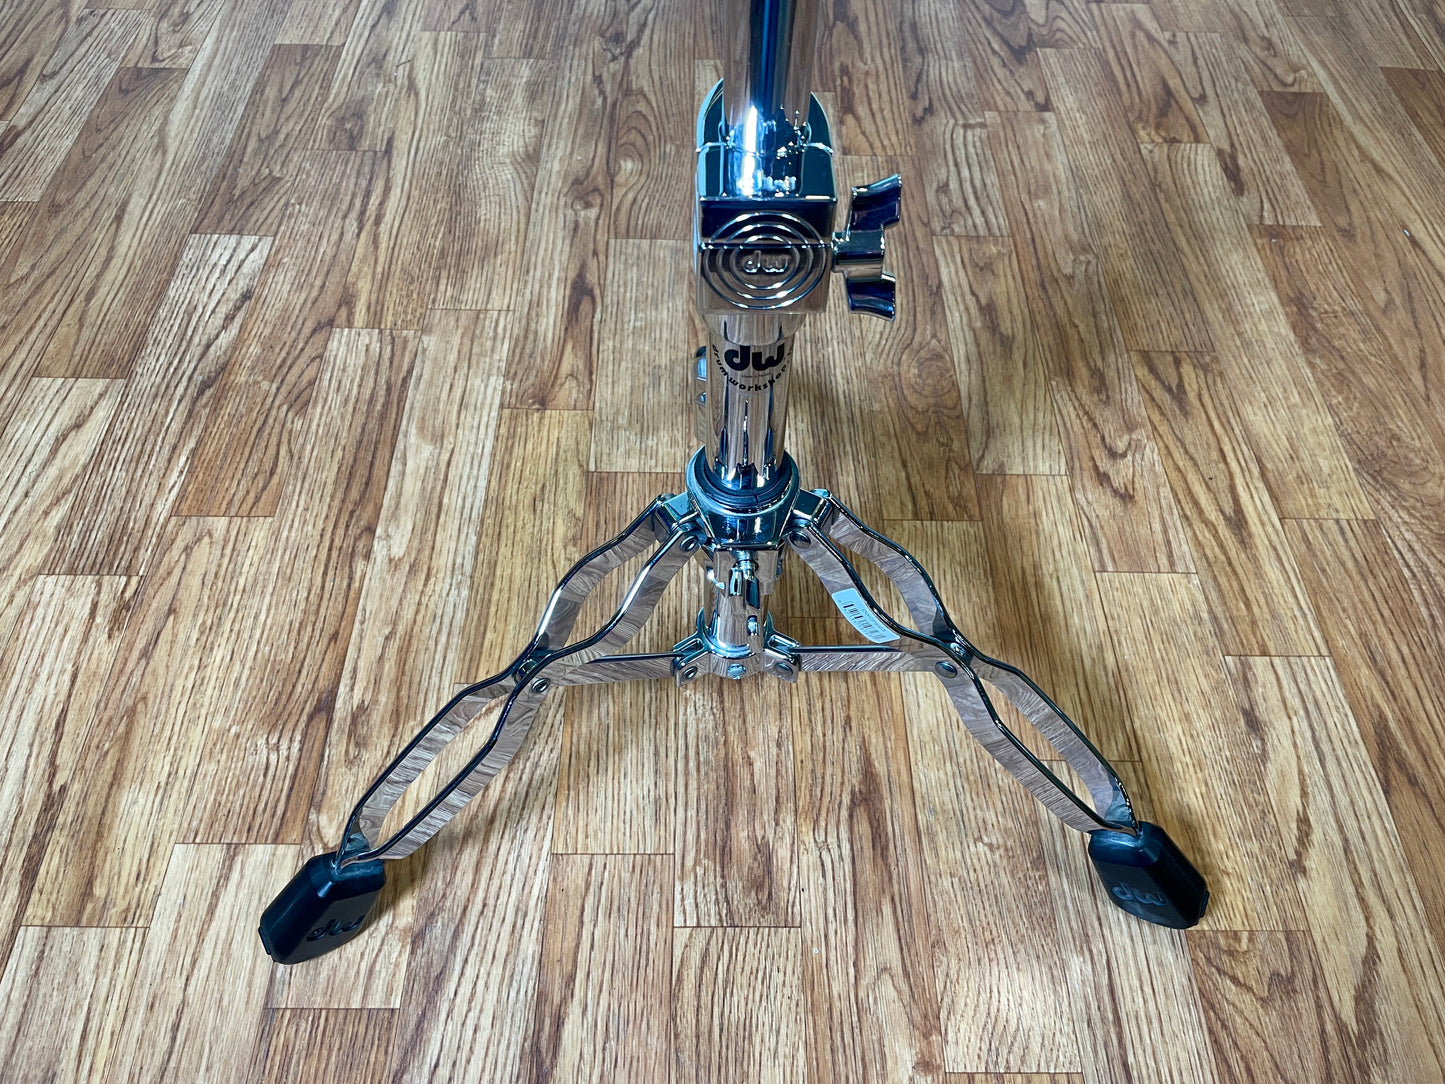 DW 9303 10" & 12" Small Snare Drum Stand DWCP9303 9000 Series Drum Workshop